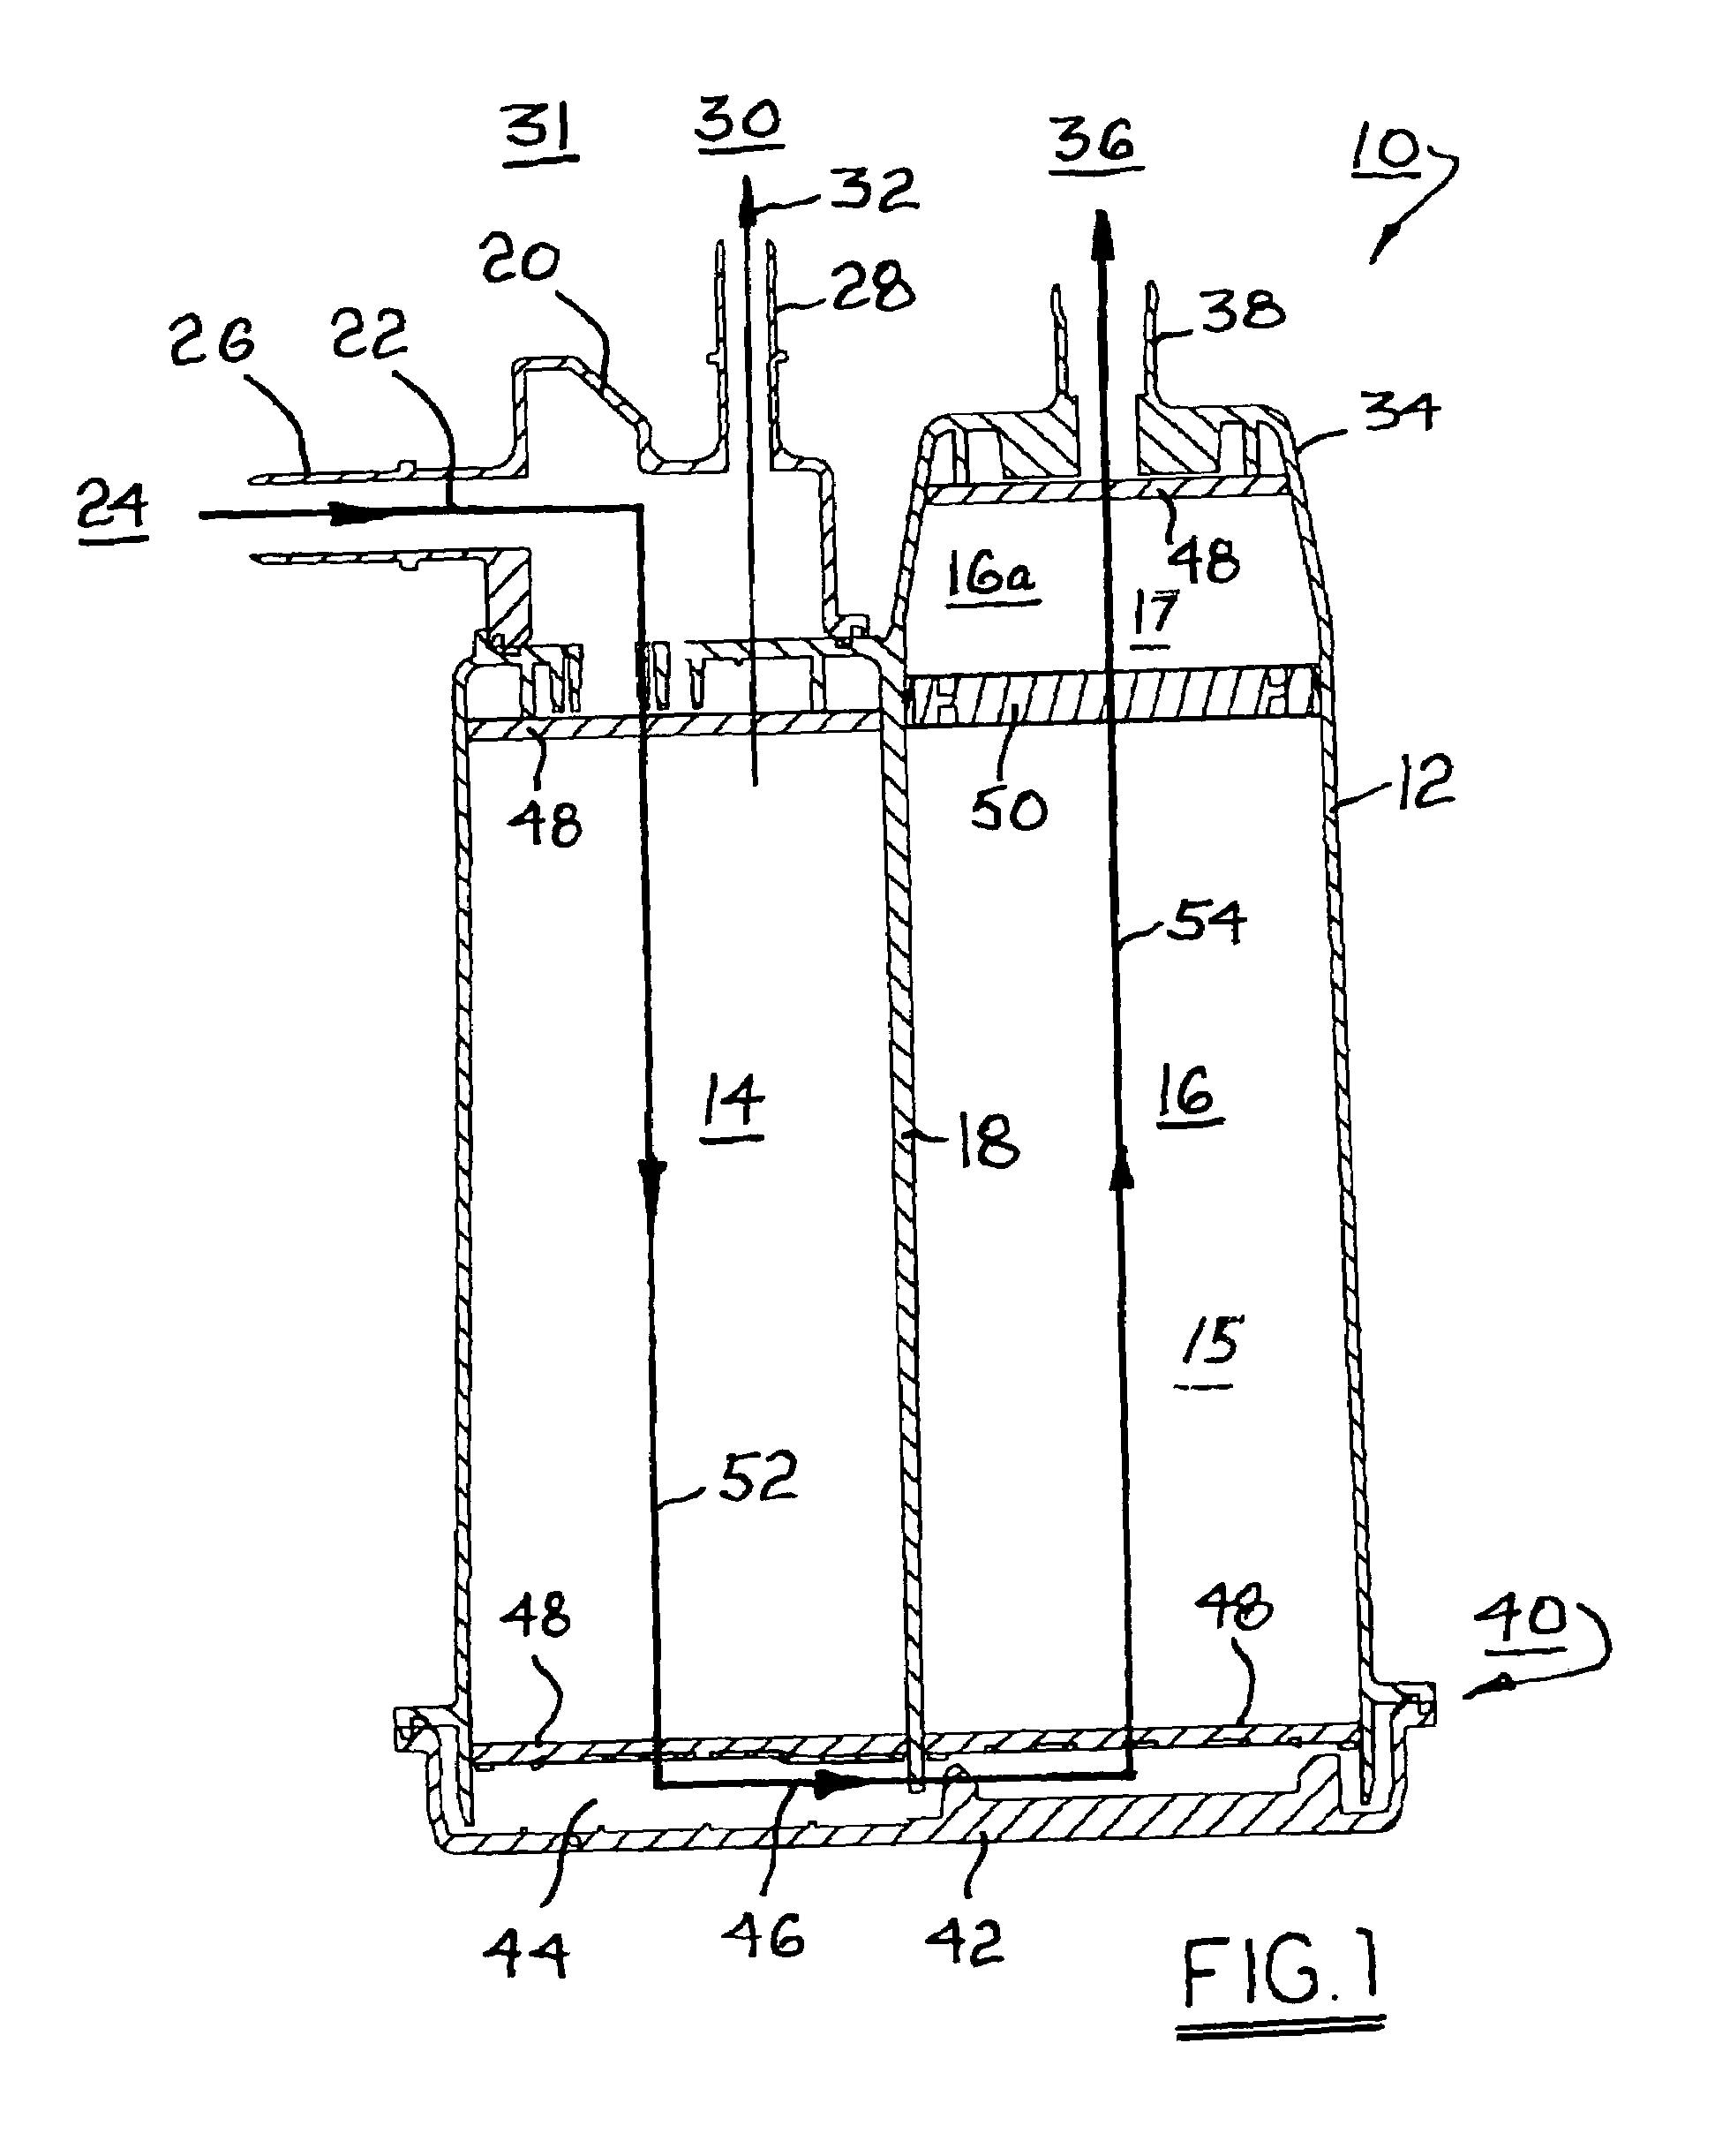 Evaporative emissions canister having an internal insert